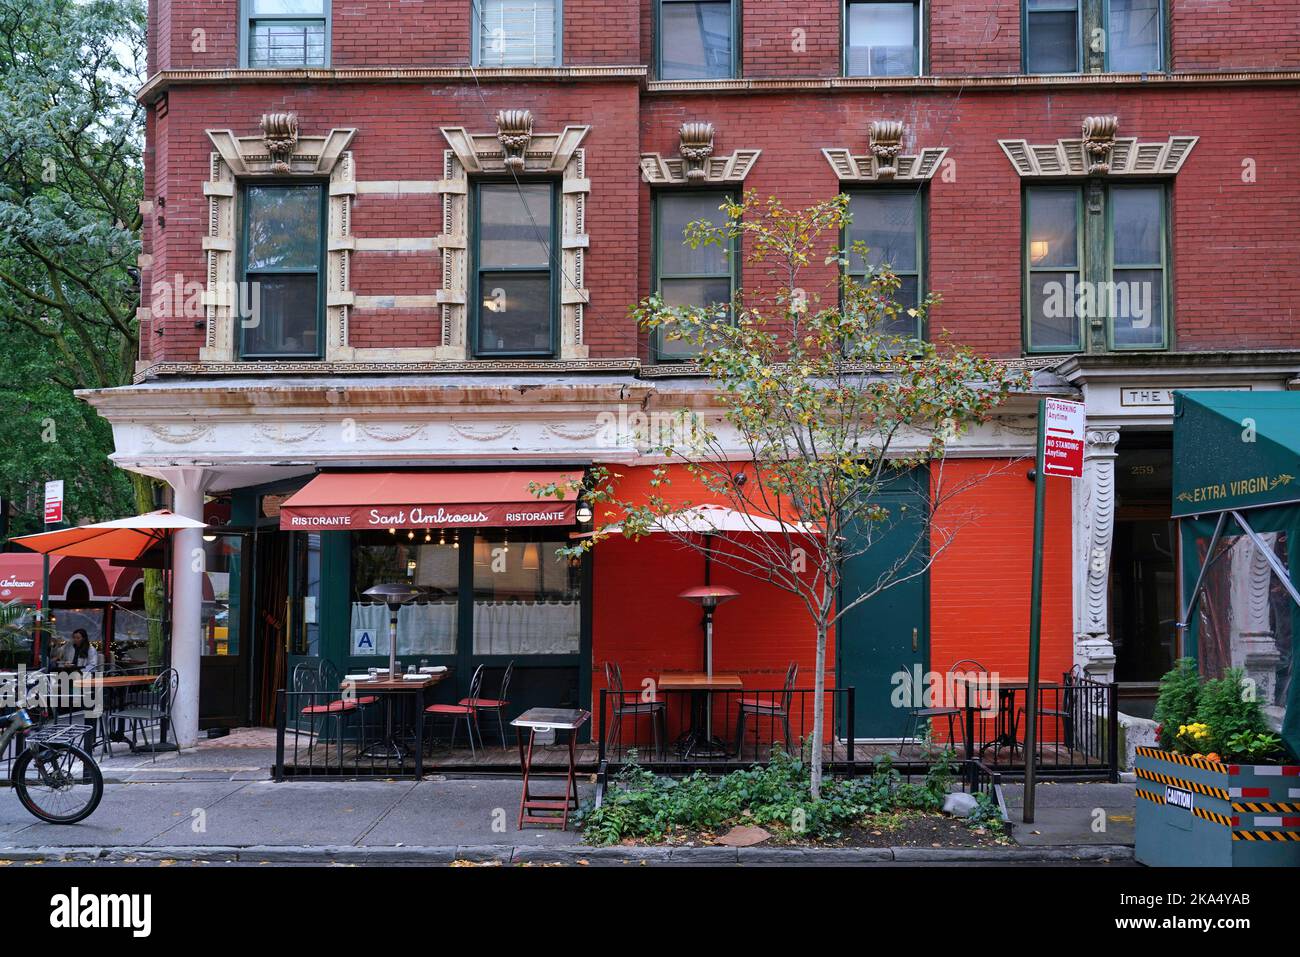 New York, NY - October 2022:  The Greenwich Village area of Manhattan has small independent shops and restaurants in ornate old buildings Stock Photo